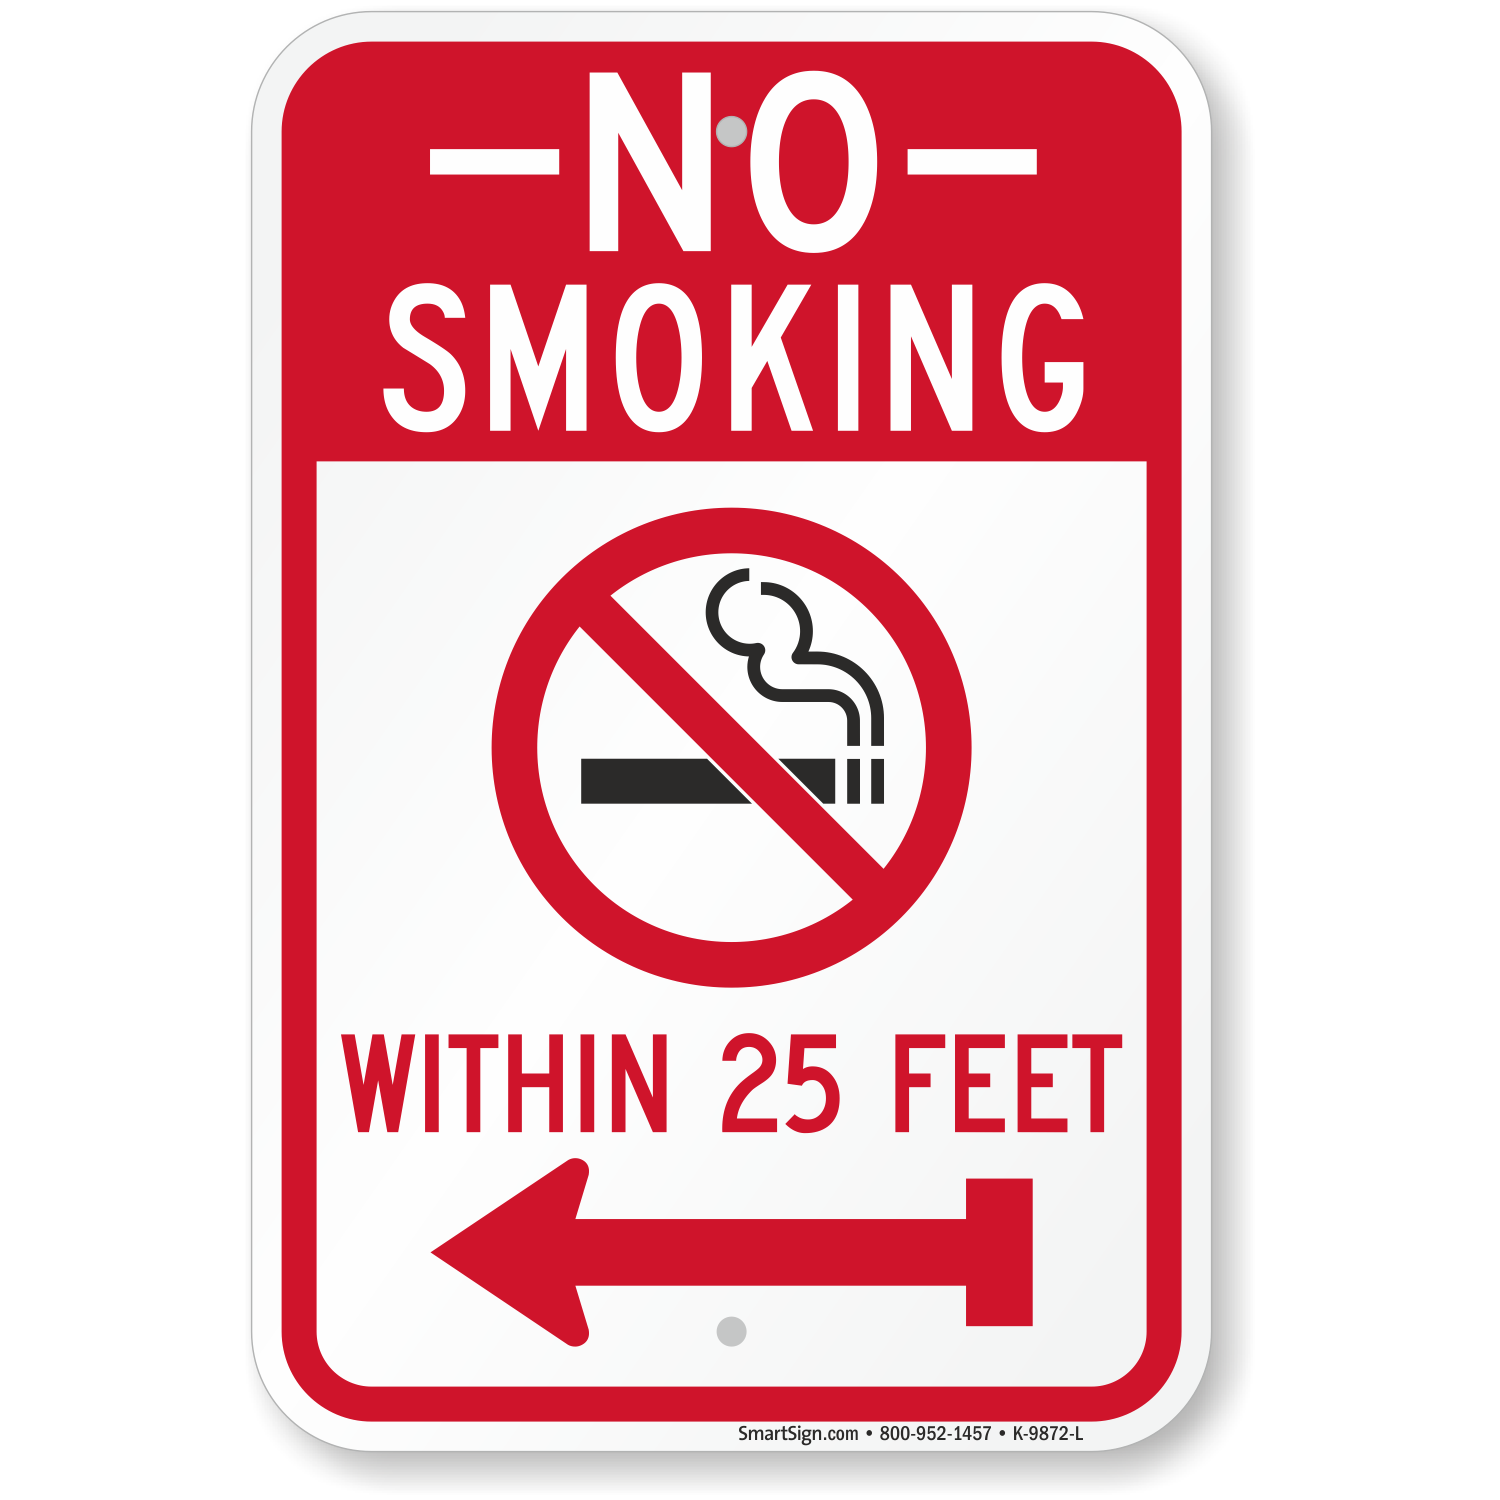 Within 25 Feet with Left Arrow Aluminum Sign 18 Length Smartsign K-9872-L-AL-12x18No Smoking 0.5 Height 12 Width 